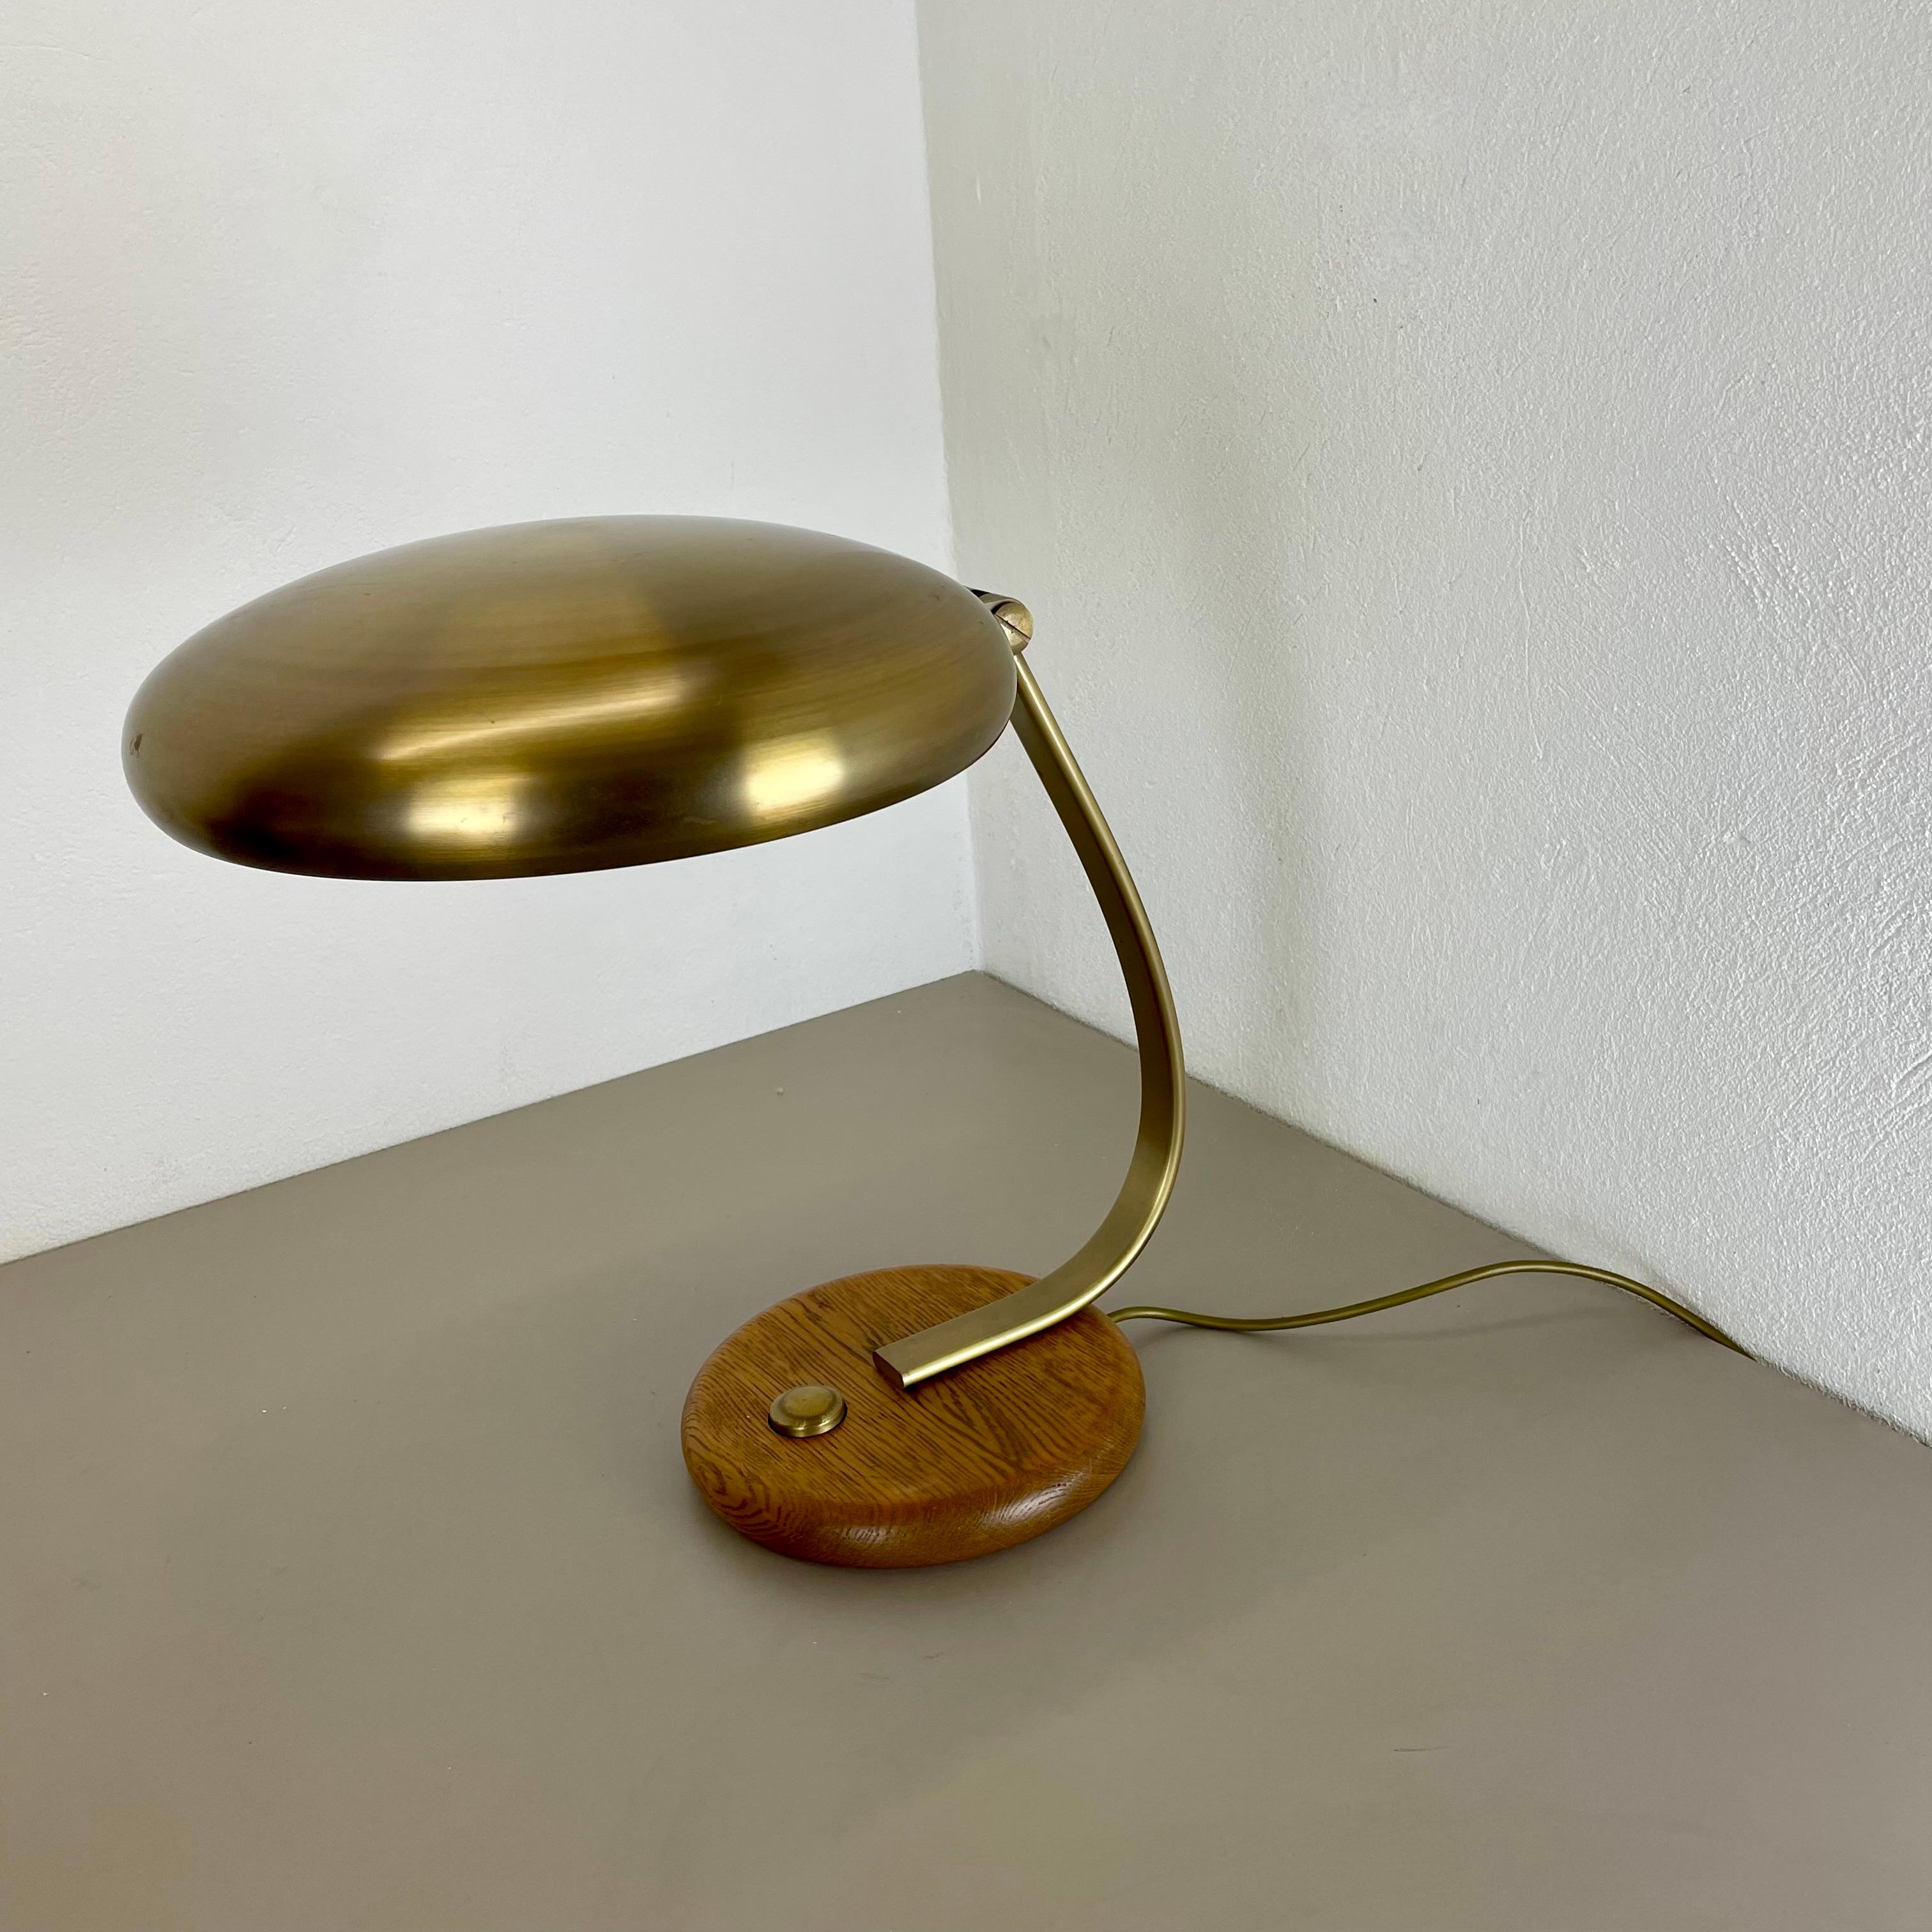 Article:

 table light


Producer:

Temde lights, Germany



Origin:

Germany



Age:

1970s




Original vintage table light made of brass and a wooden oak base element.   The object was designed and produced by TEMDE LIGHTS in Germany in the